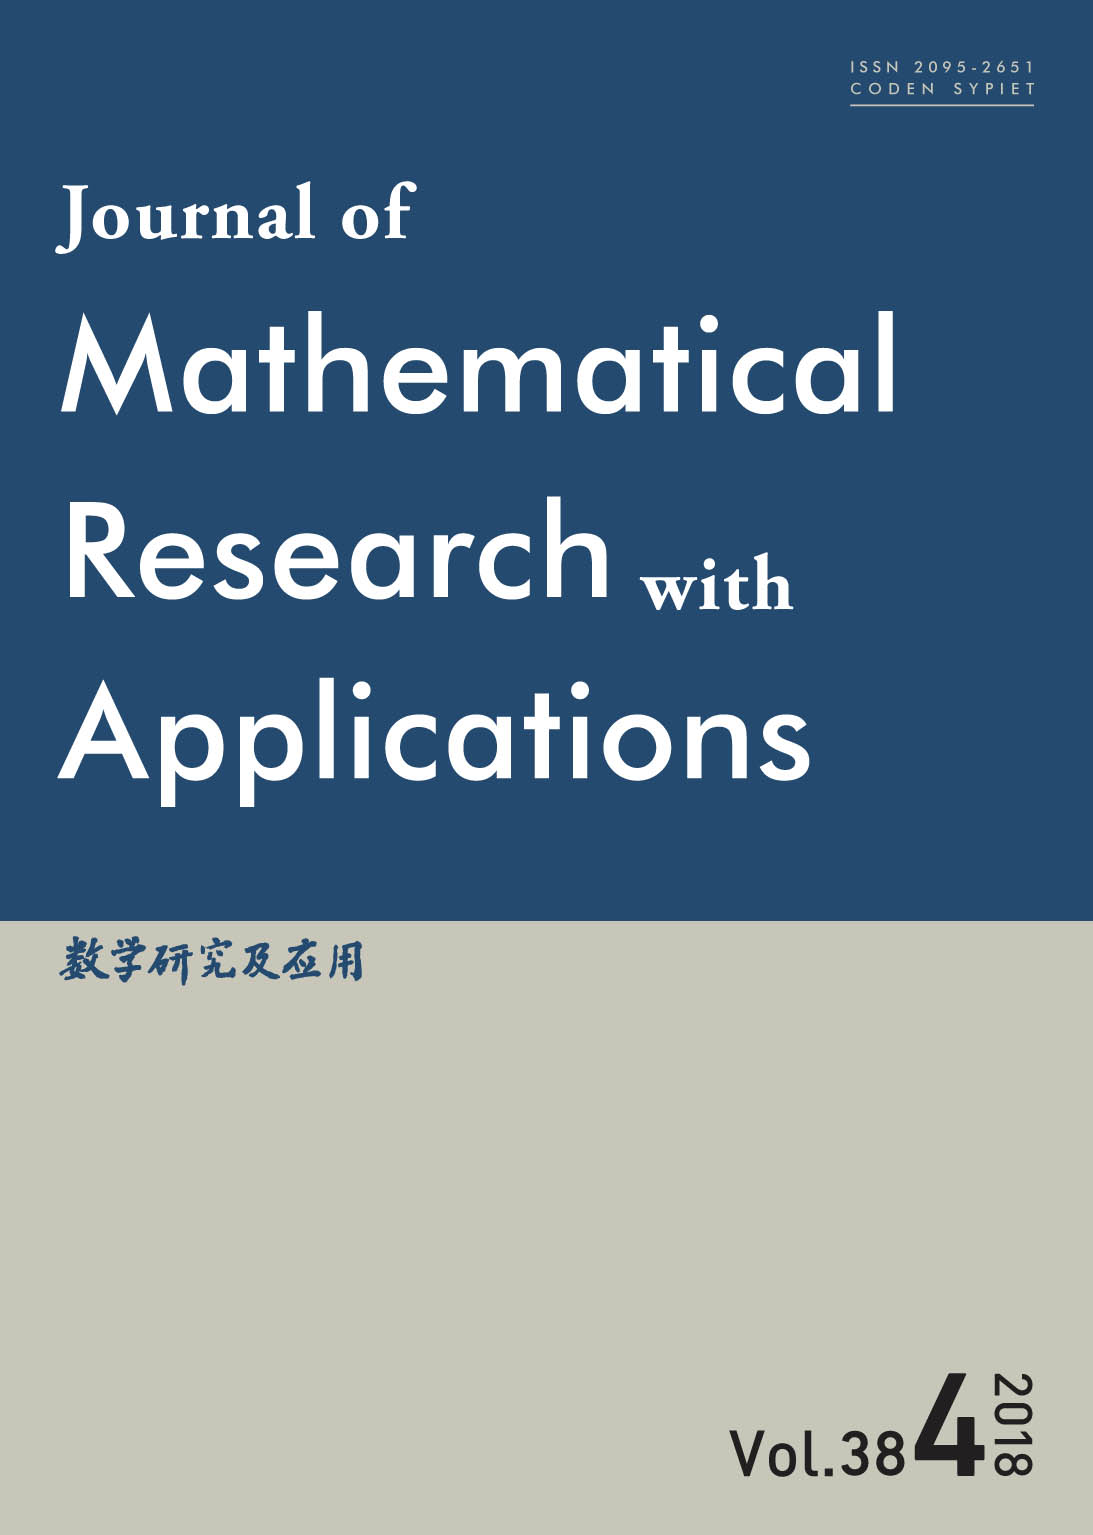 Journal of Mathematical Research with Applications